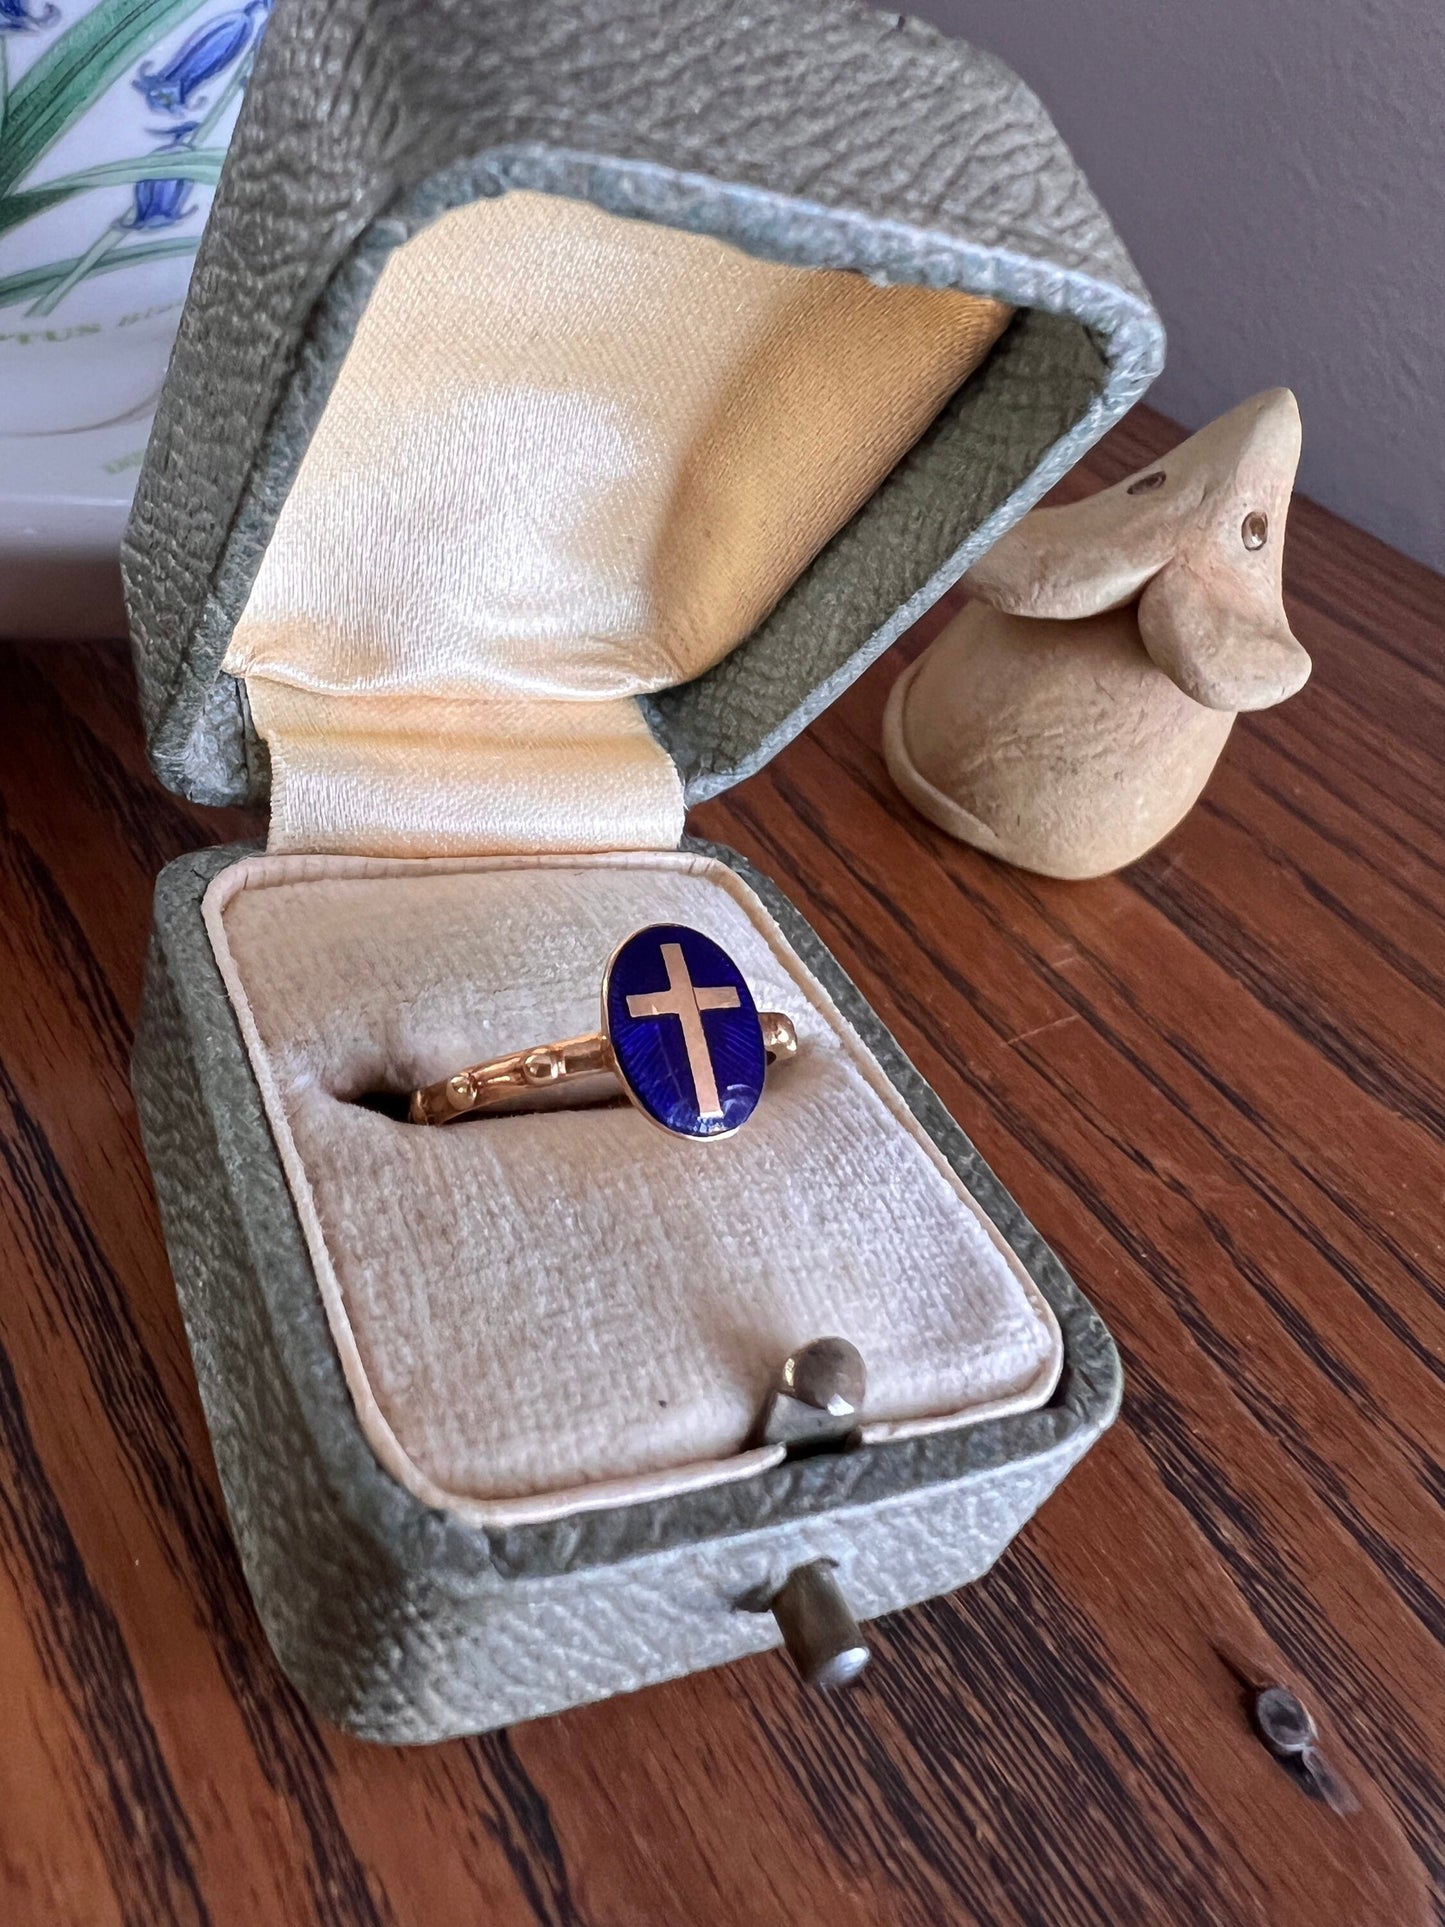 French VICTORIAN Antique ROSARY Ring 18k Gold Cobalt Blue ENAMEL Cross Riveted Stacker Band OOaK Gift Belle Epoque Religious Minimalist Rare